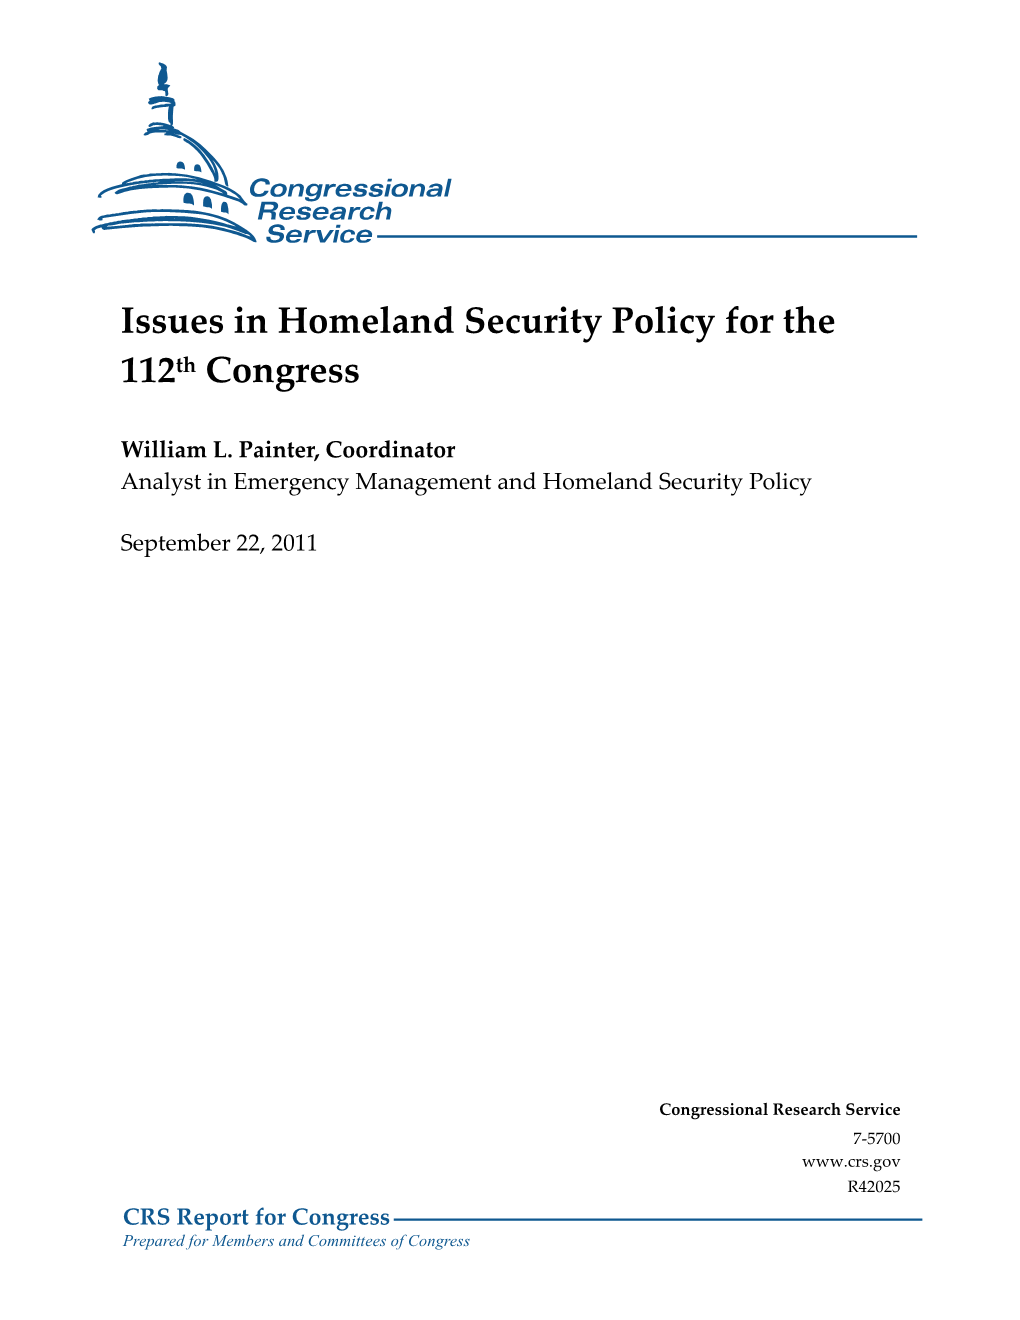 Issues in Homeland Security Policy for the 112Th Congress